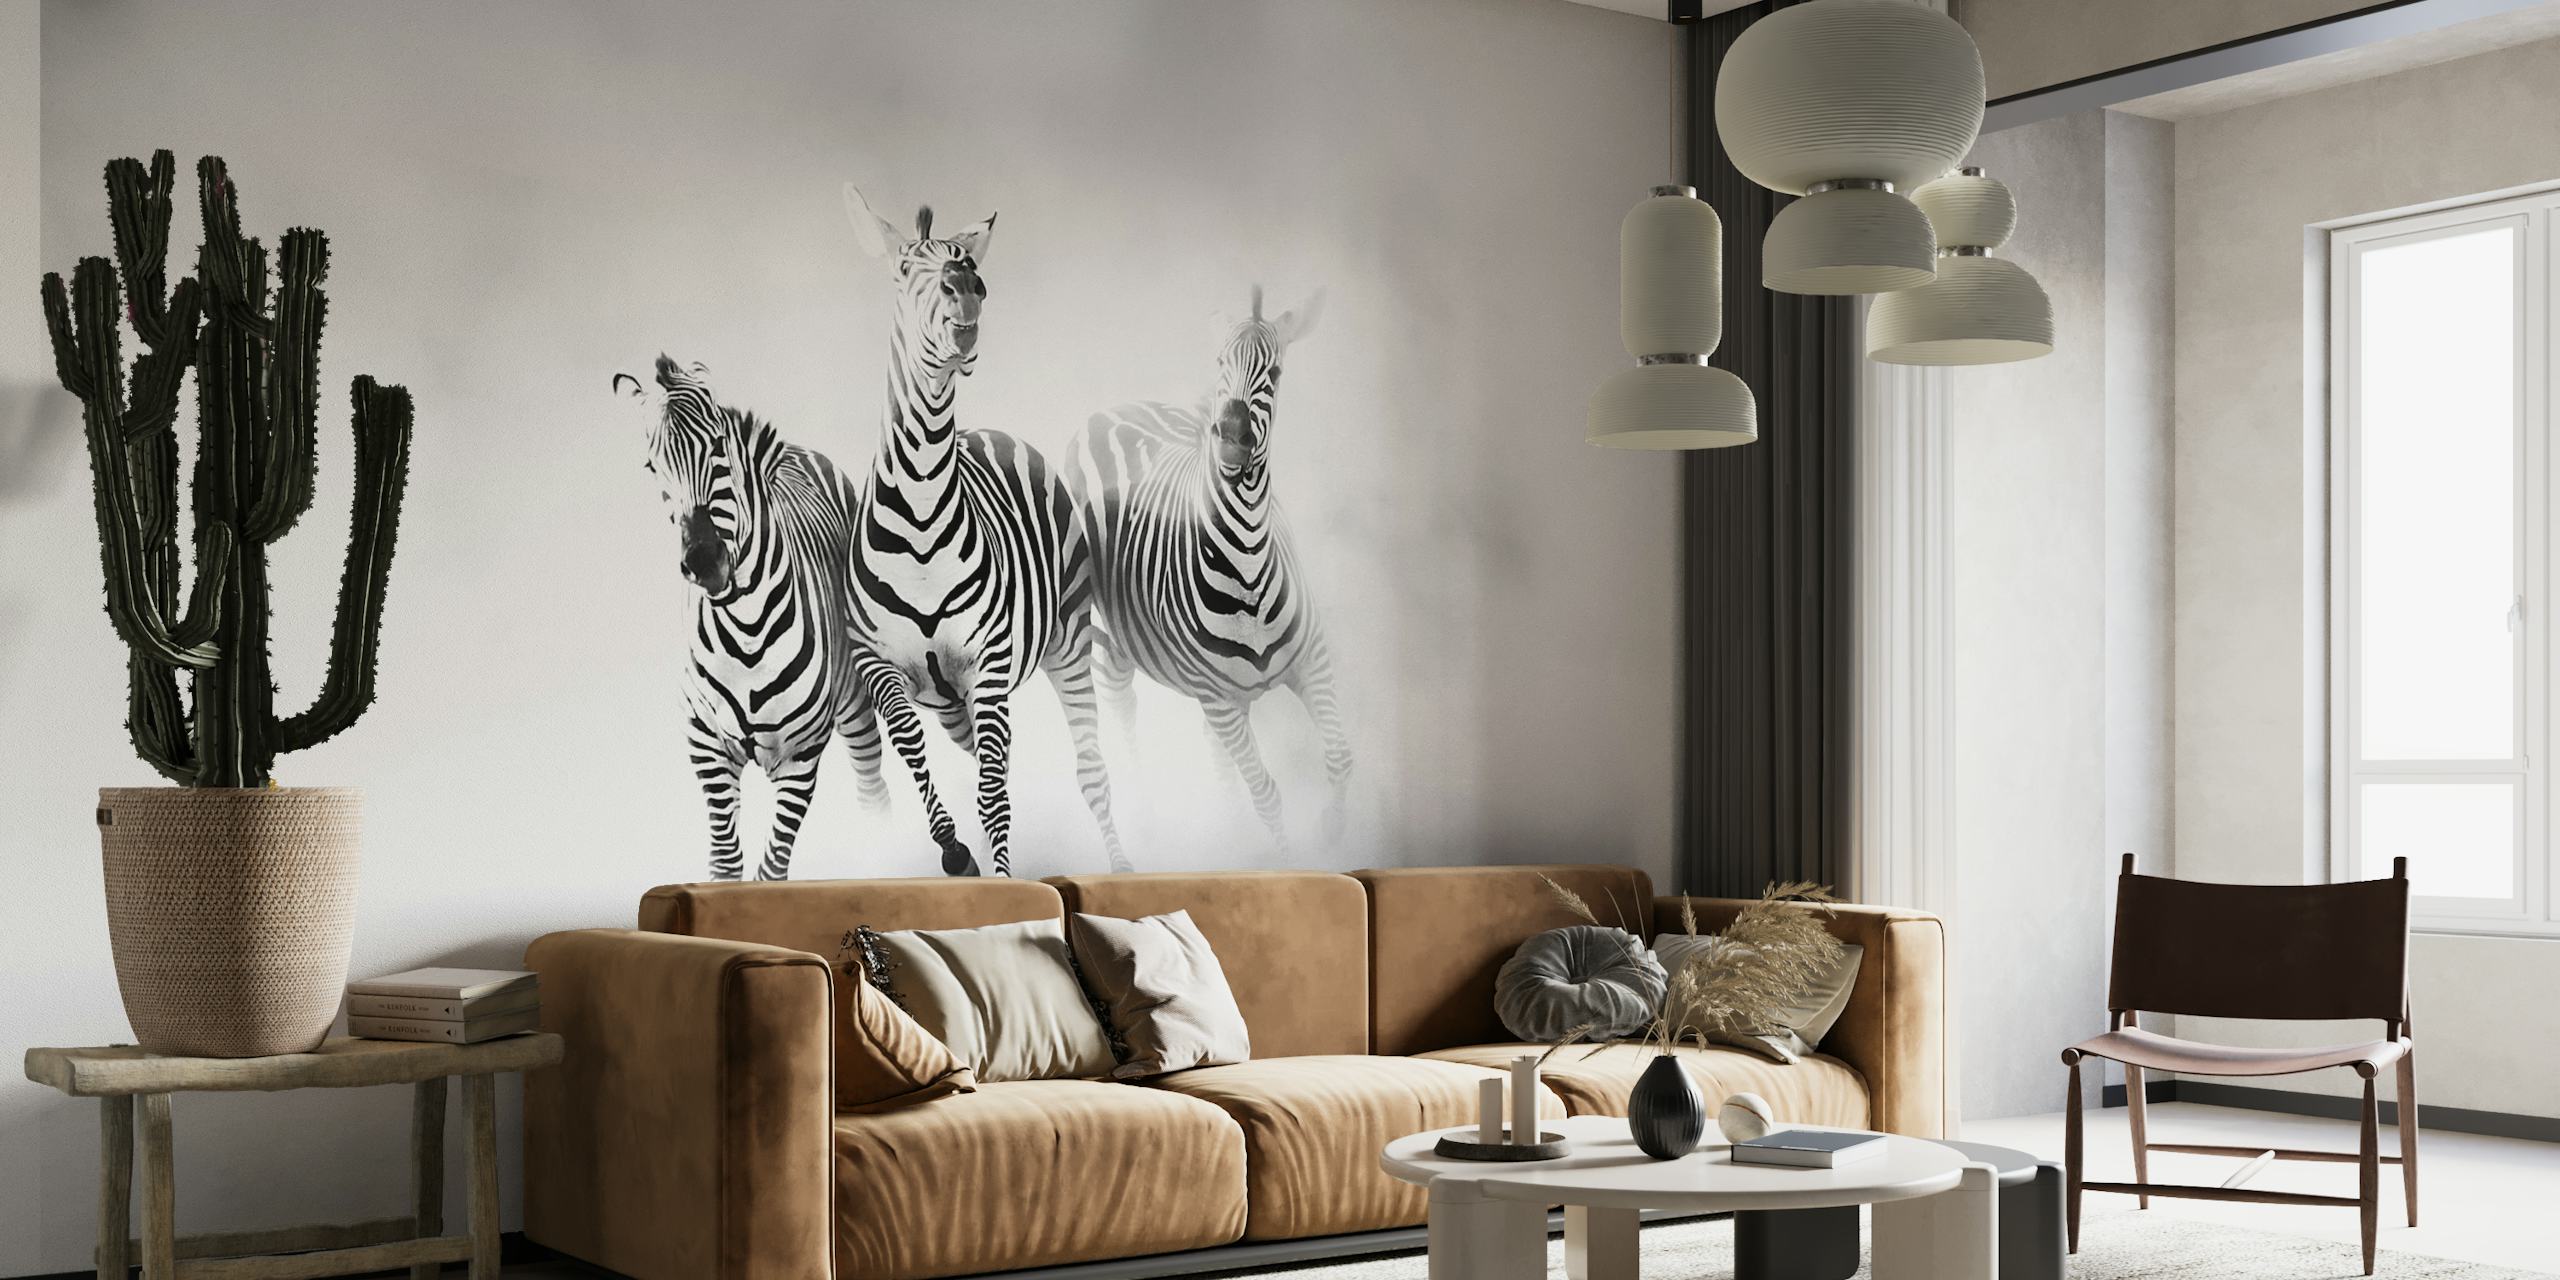 Black and white wall mural of zebras in motion